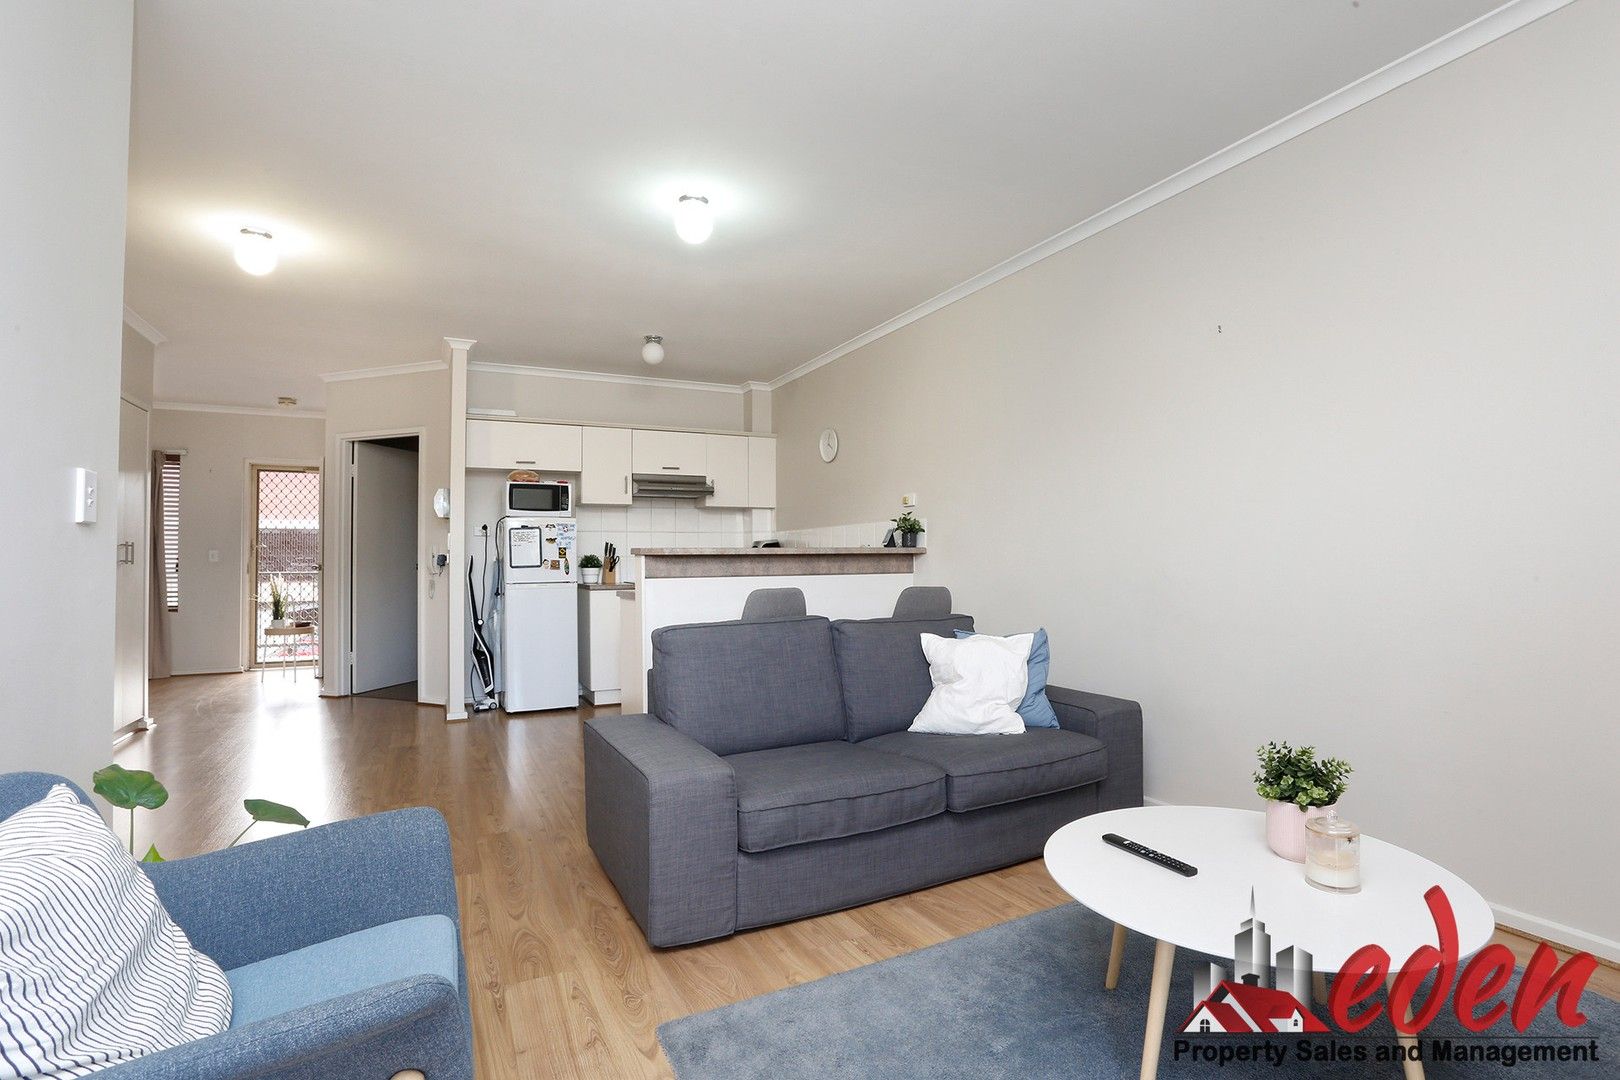 2 bedrooms Apartment / Unit / Flat in 13/81 CARRINGTON STREET ADELAIDE SA, 5000